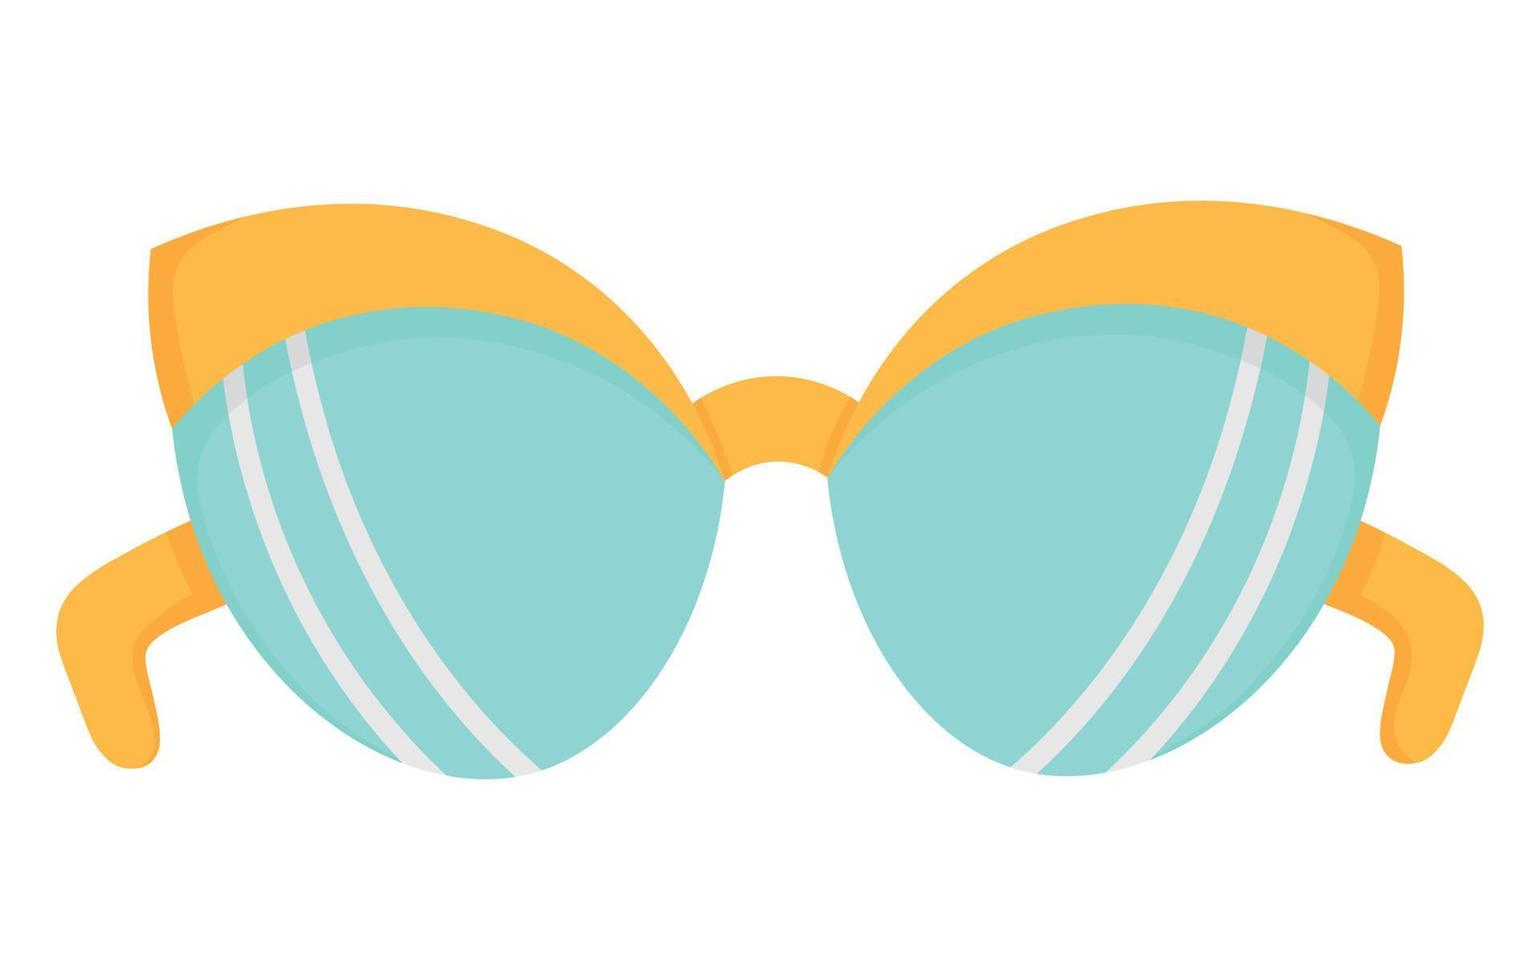 Simple classic sunglasses for walking in sunny weather. Flat doodle clipart. All objects are repainted. vector